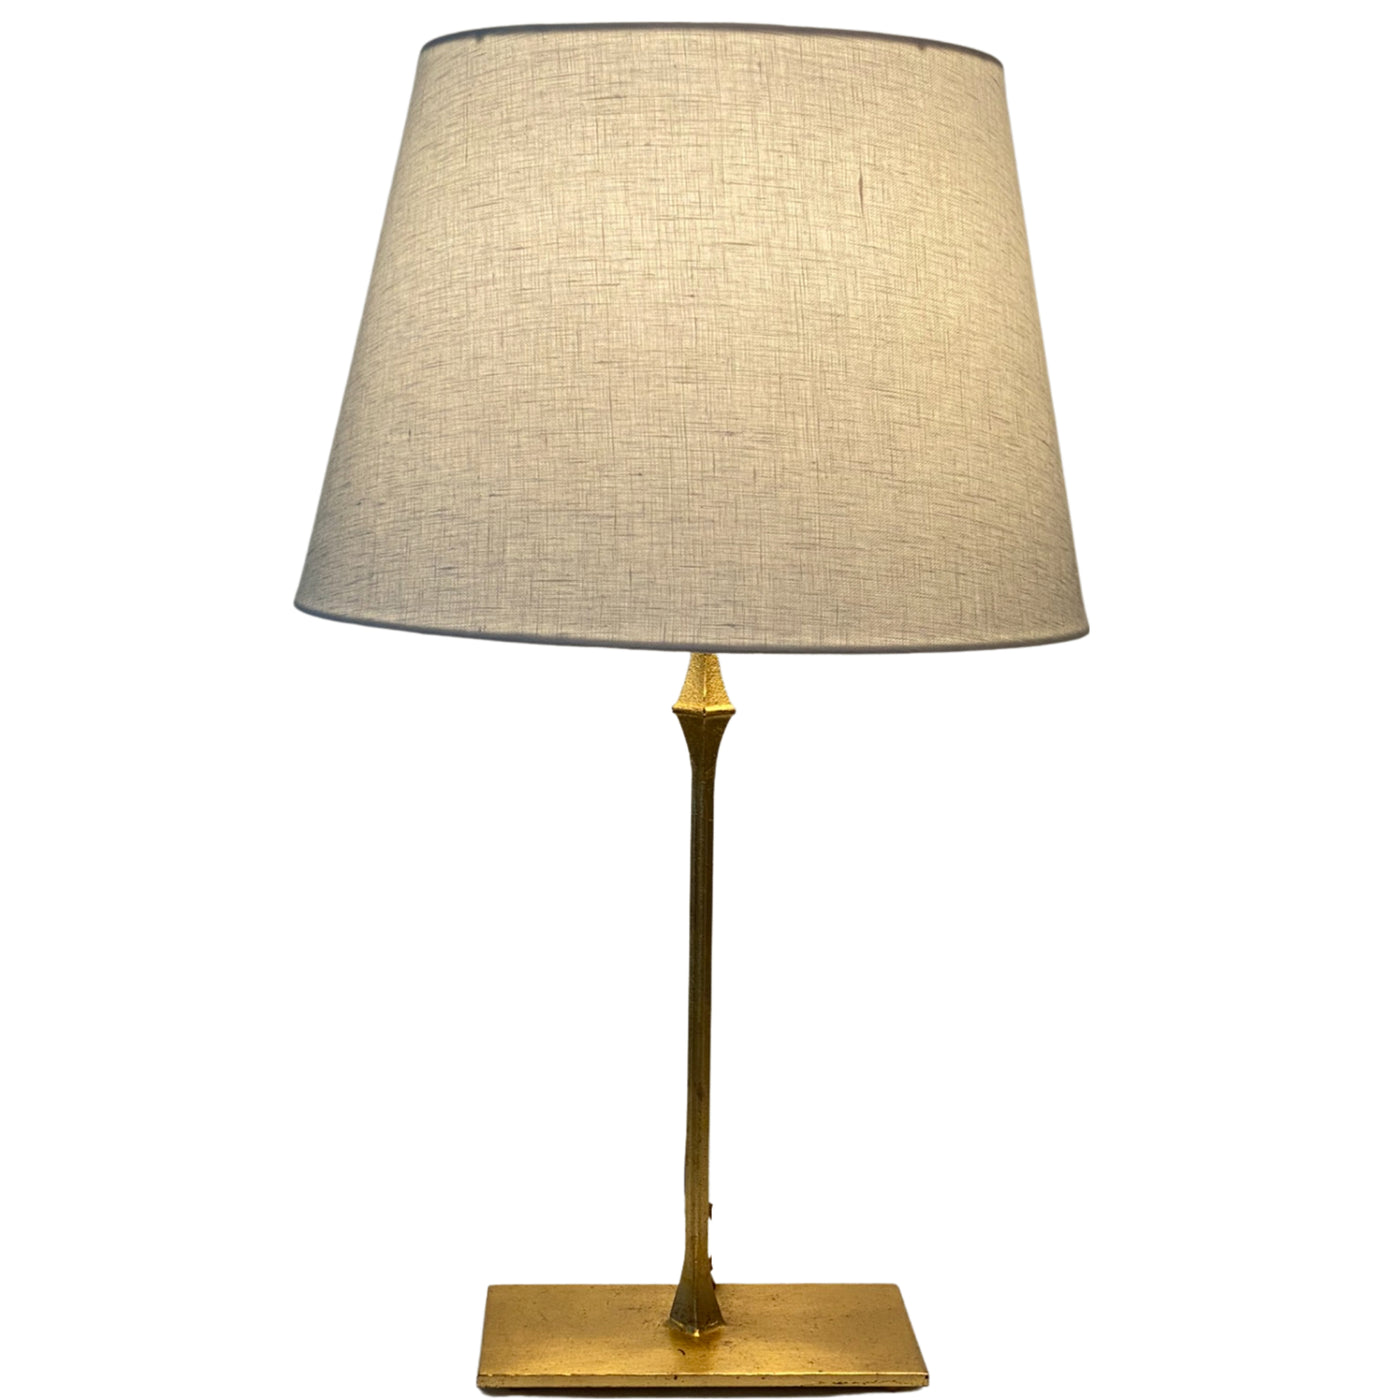 White Linen British Drum Lampshade with a Brass Bedside Lamp